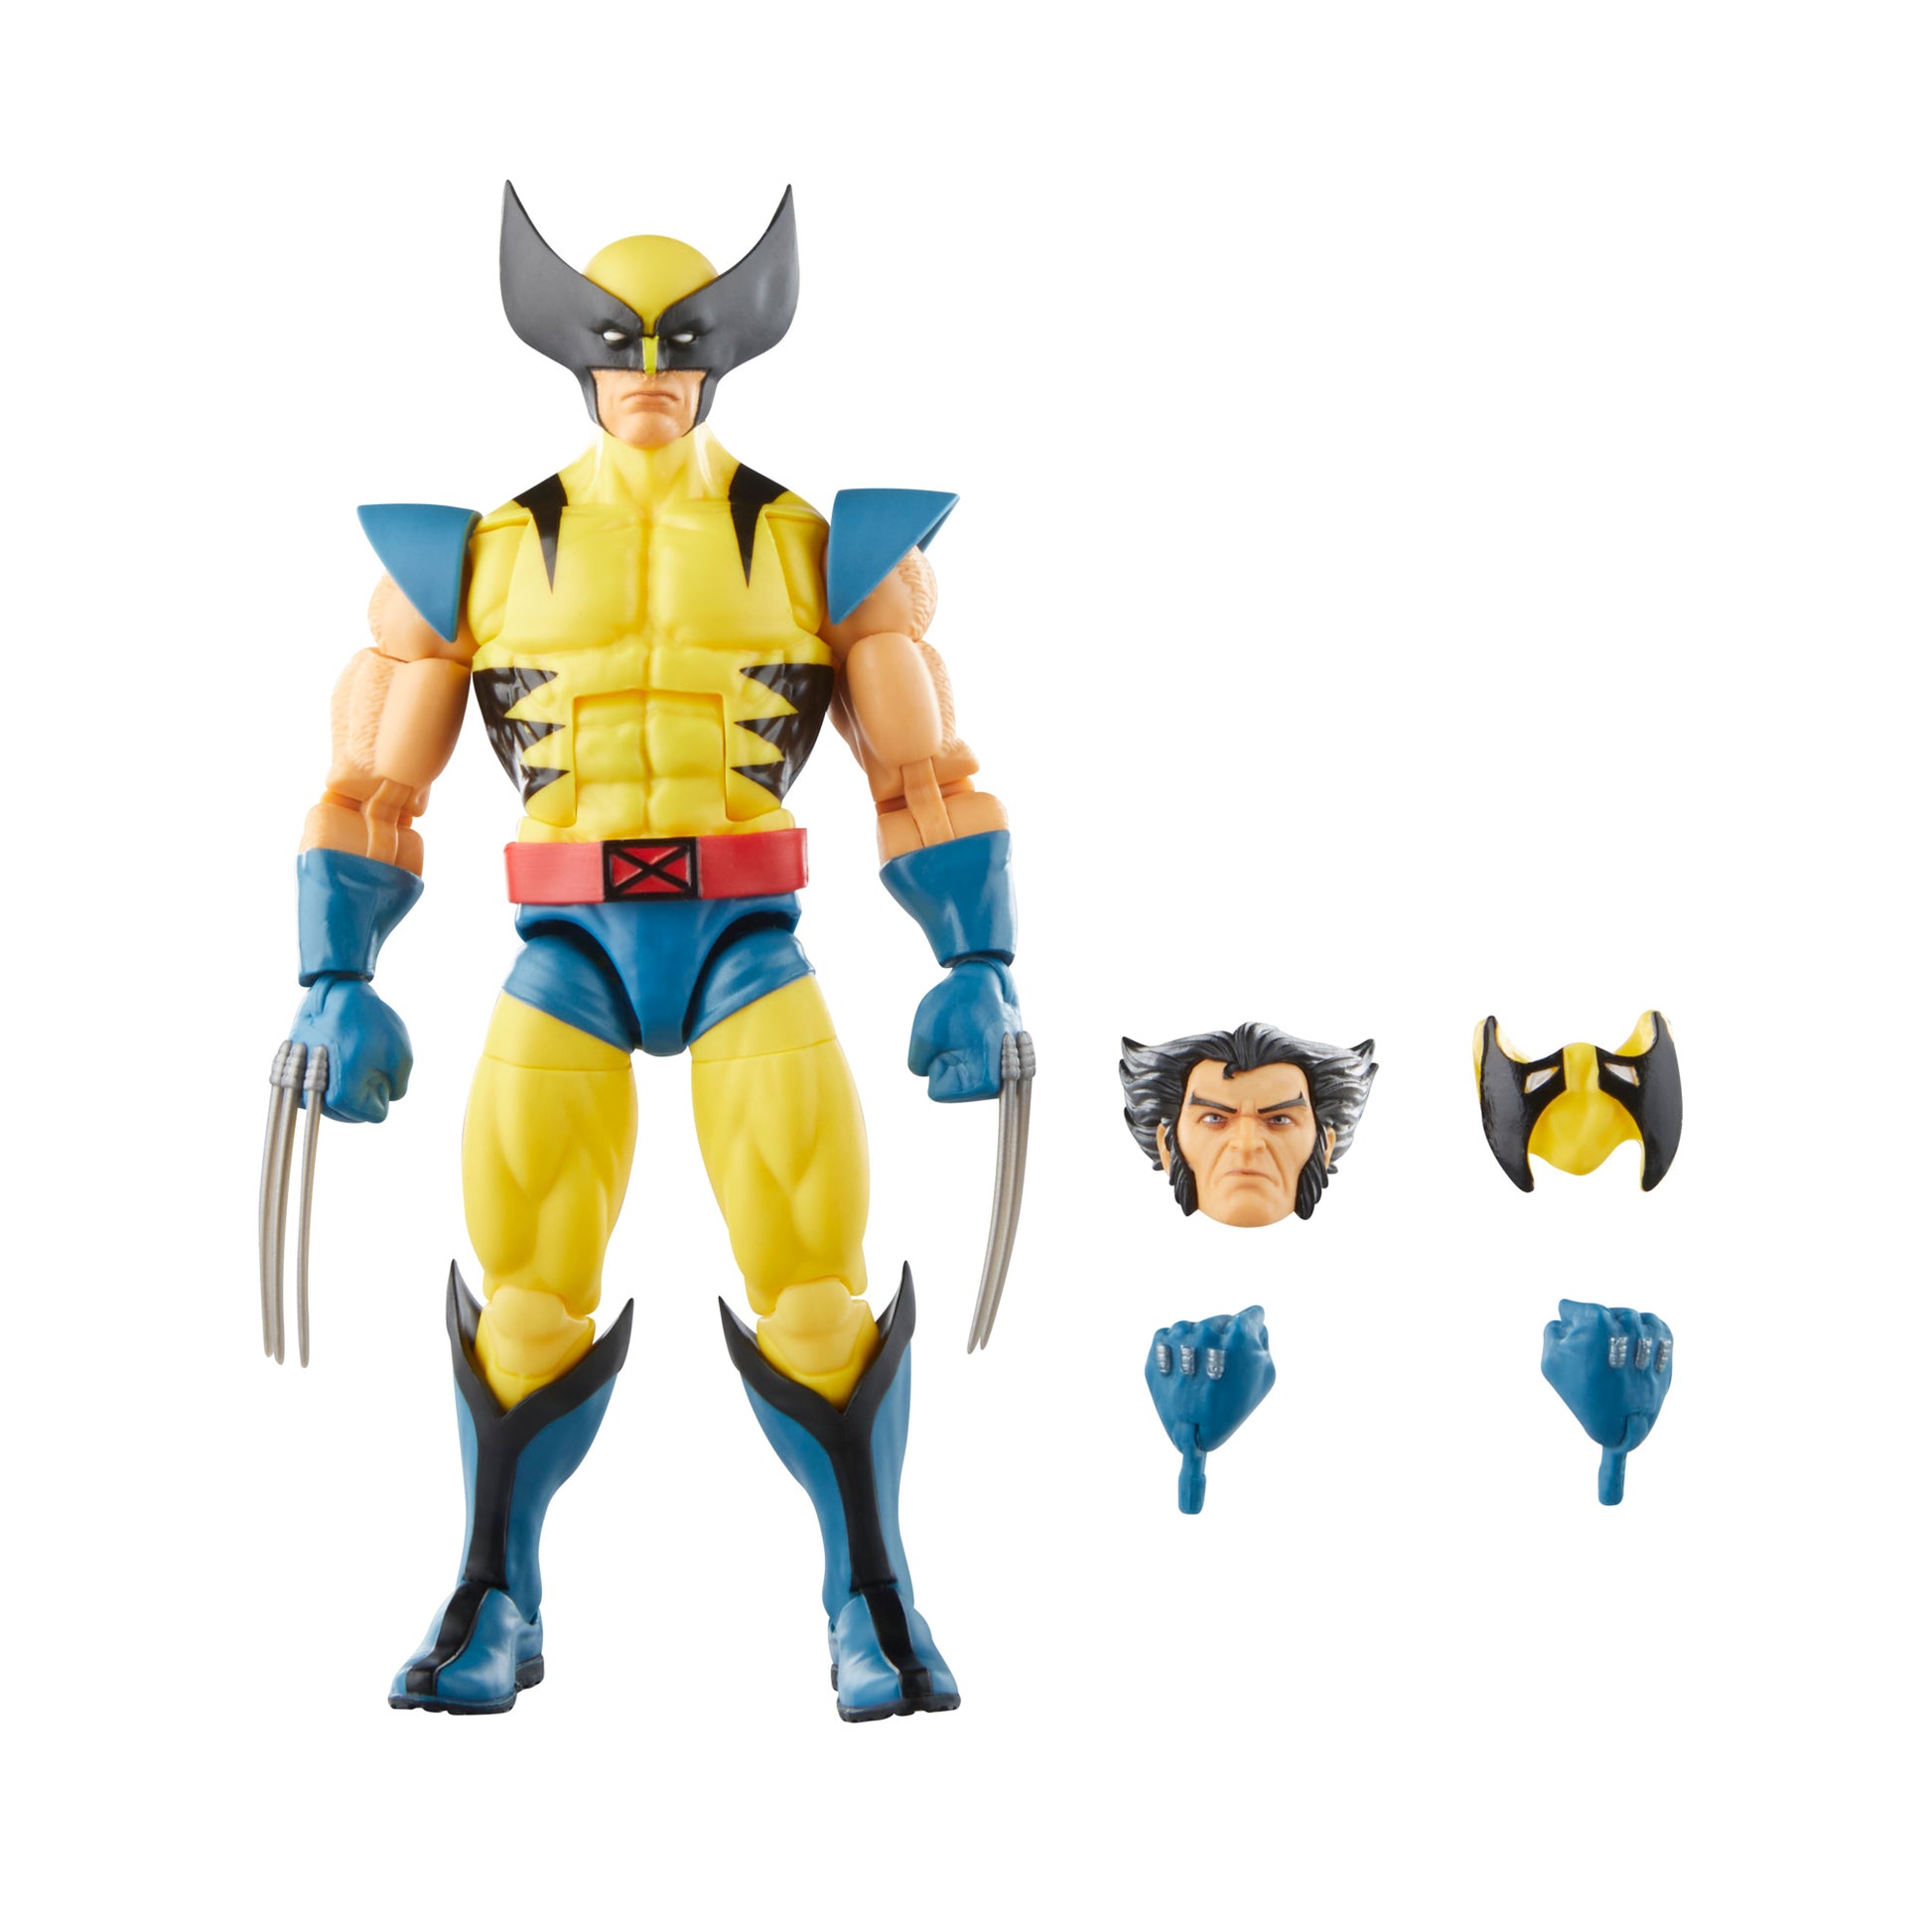 Hasbro Marvel Legends Series Wolverine Action Figure Toy with accessories - Heretoserveyou